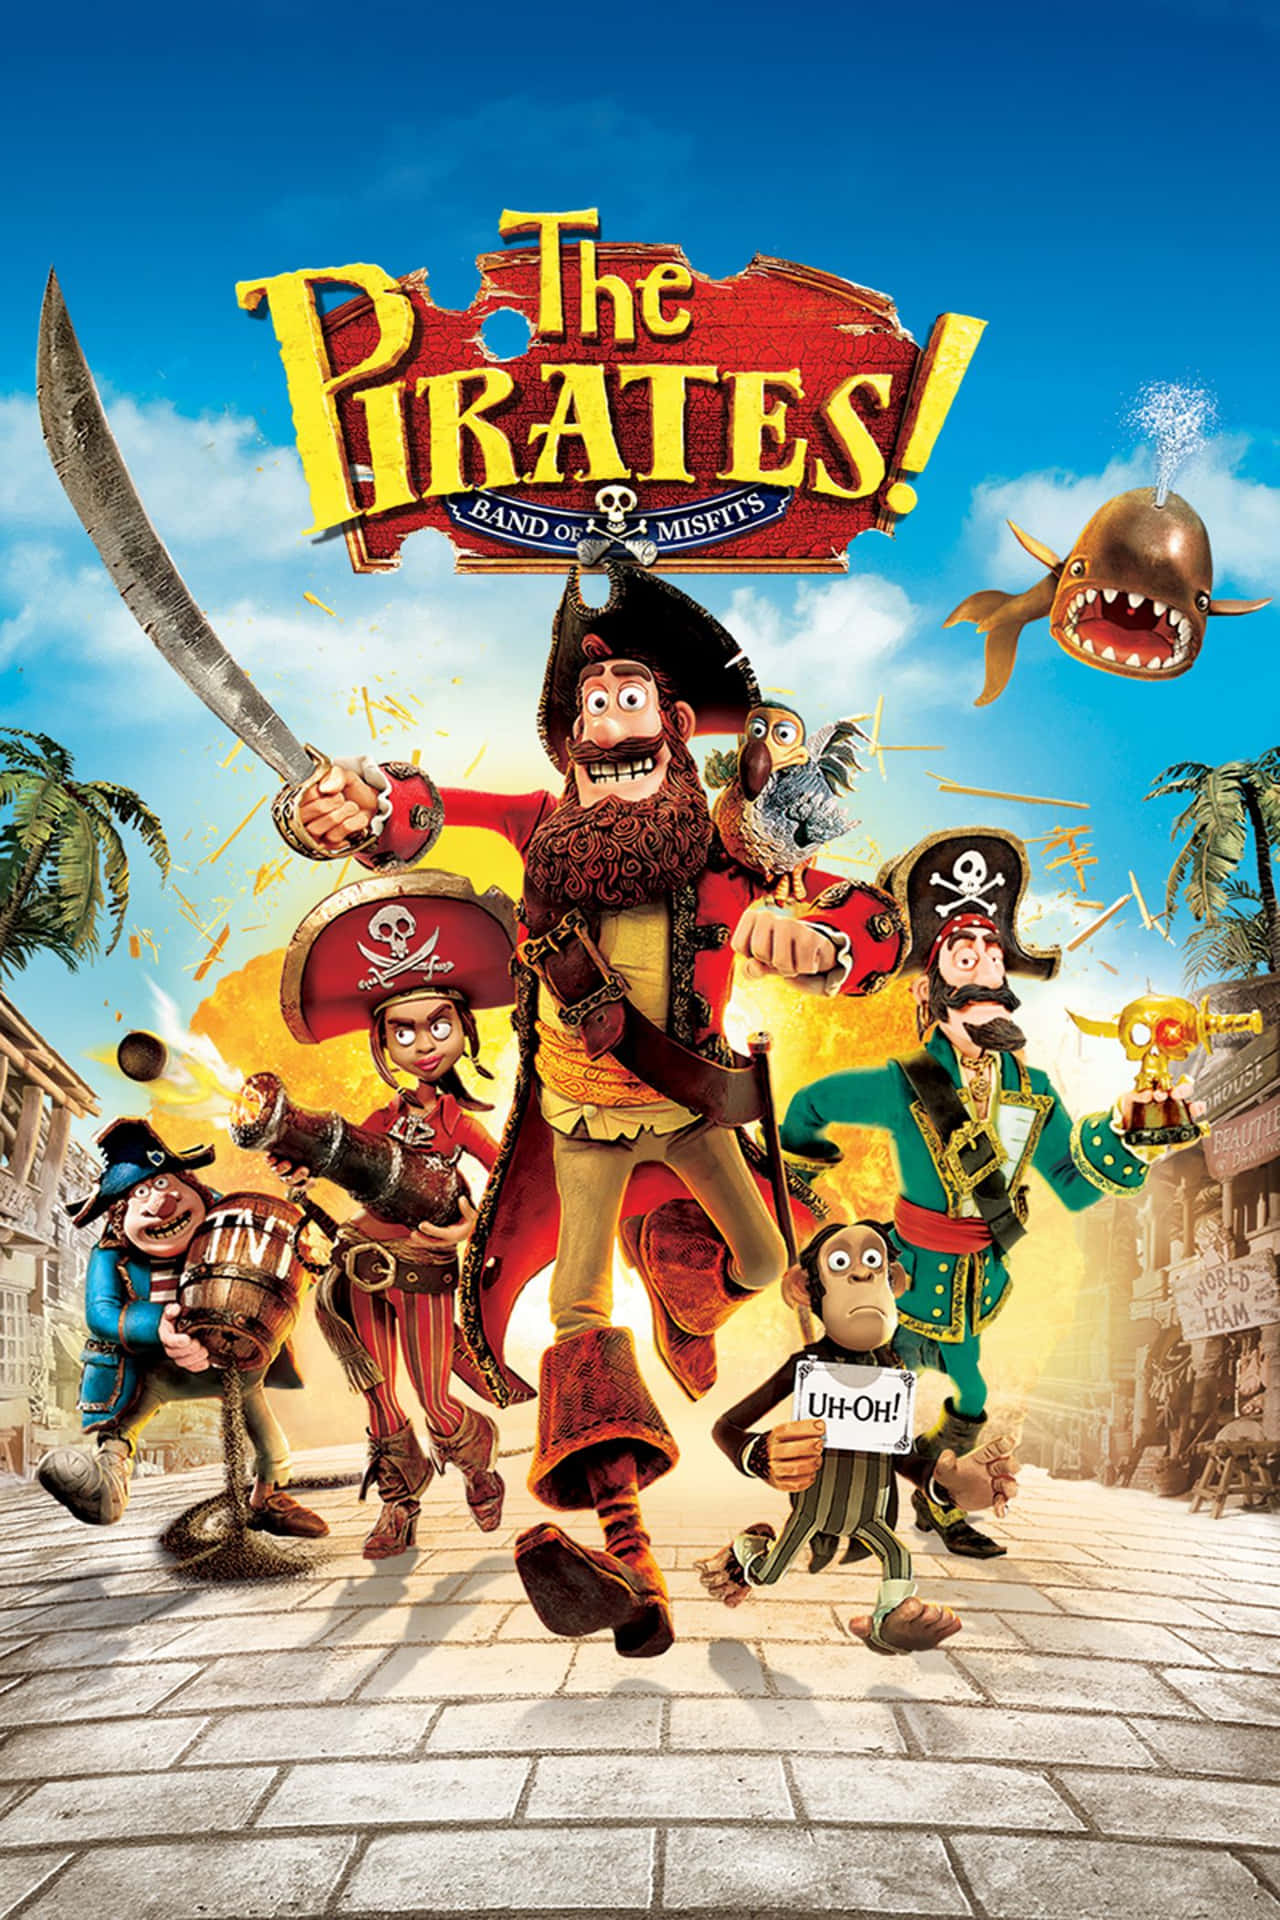 Movie Poster Of The Pirates Band Of Misfits Wallpaper